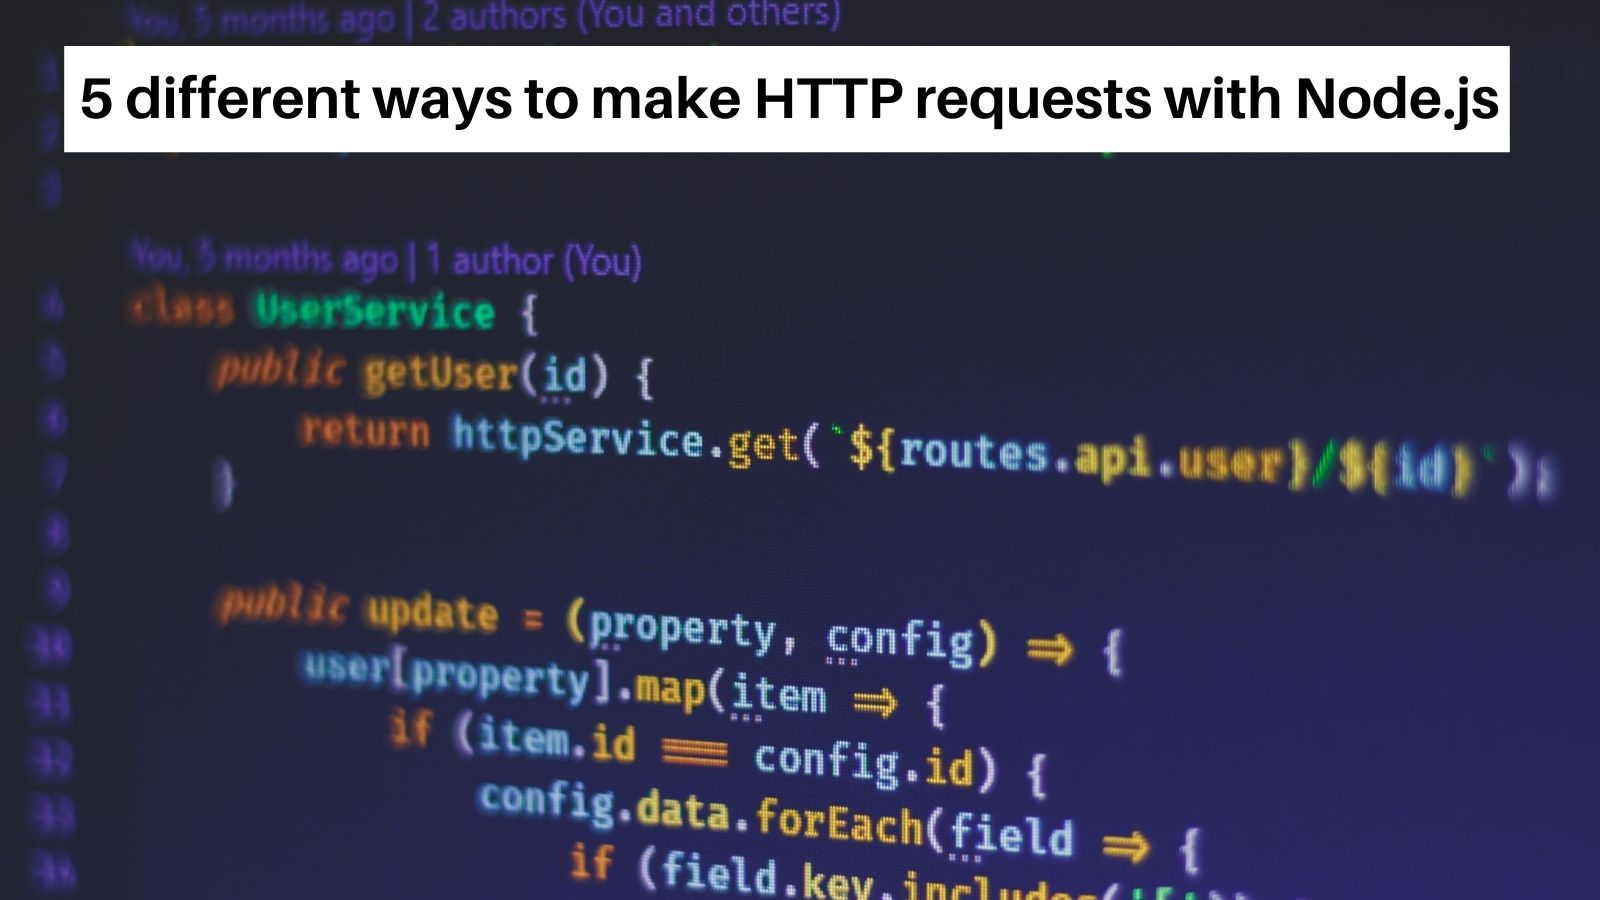 5 different ways to make HTTP requests with Node.js